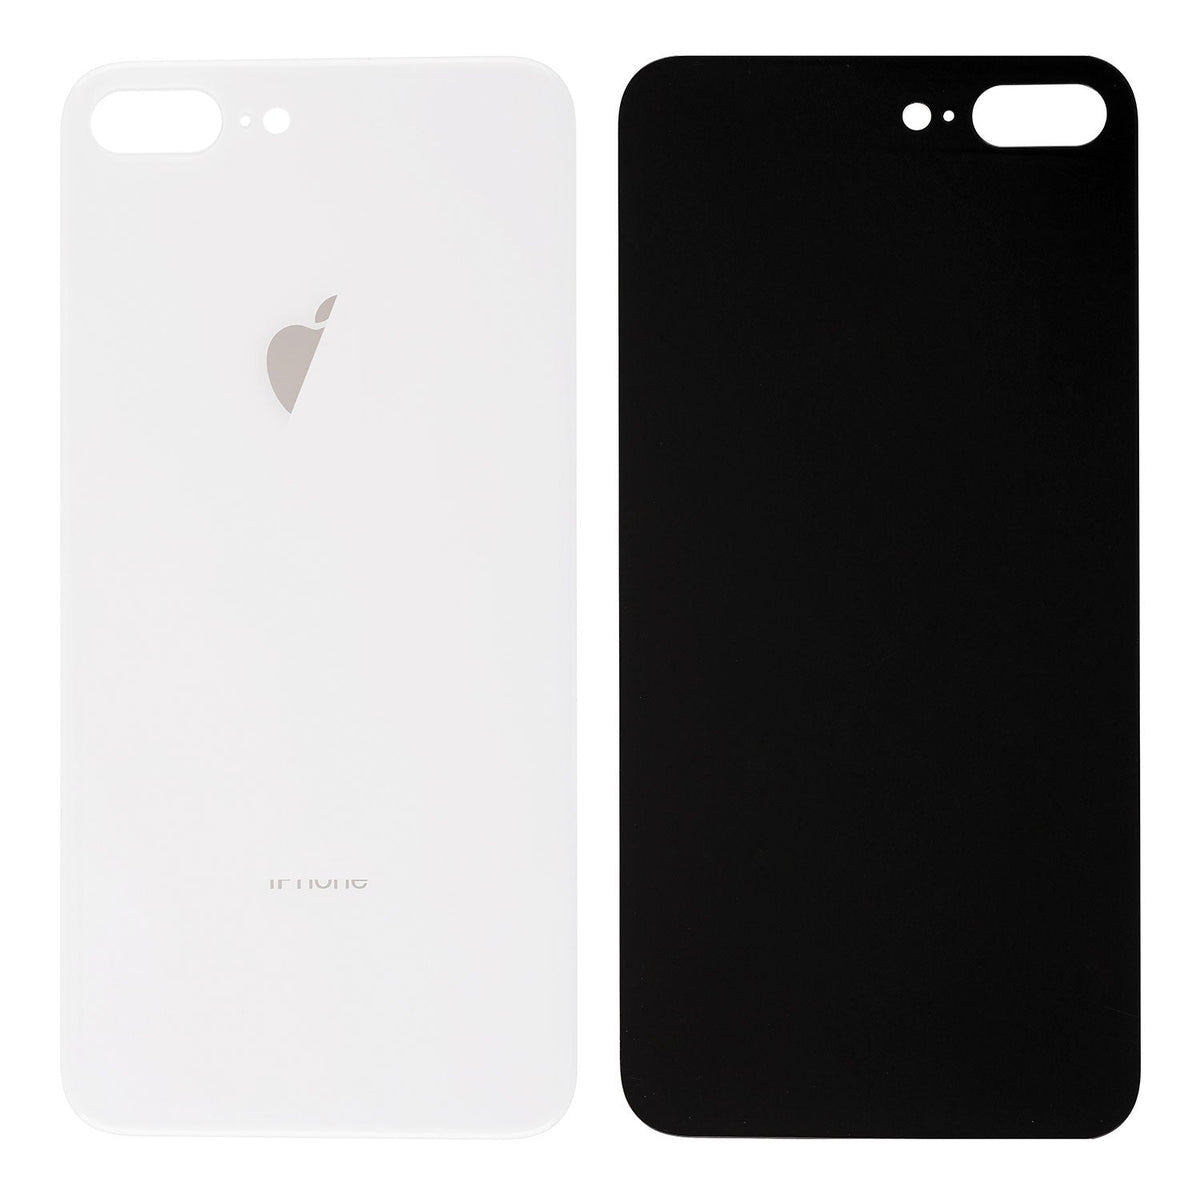 SILVER BACK COVER FOR IPHONE 8 PLUS